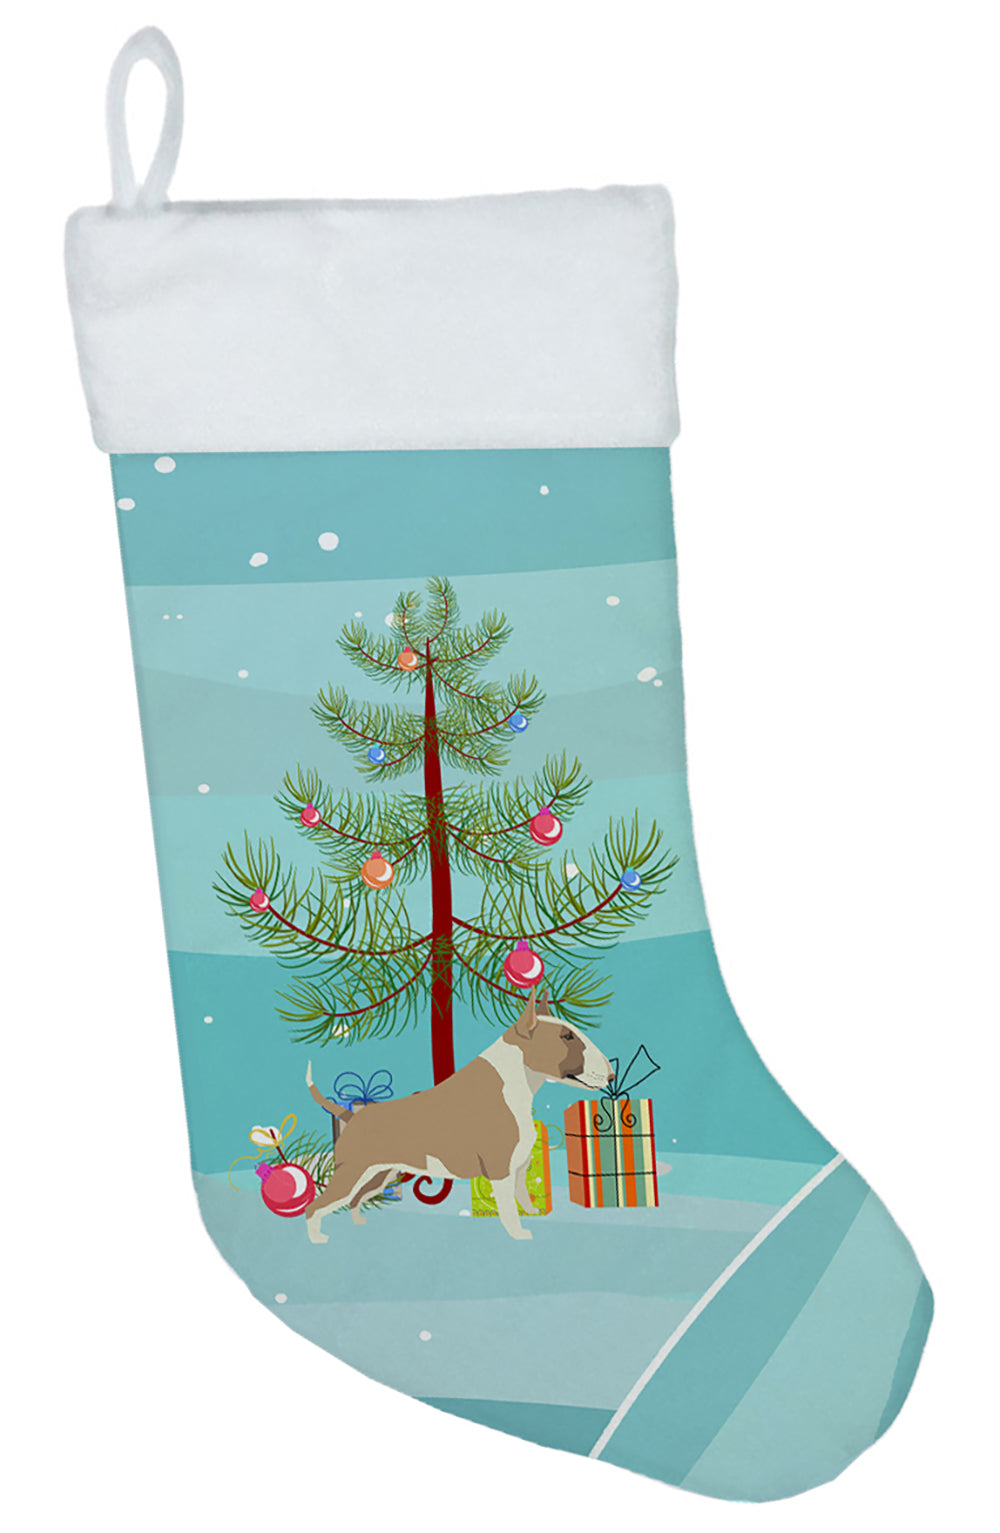 Fawn and White Bull Terrier Christmas Tree Christmas Stocking CK3528CS  the-store.com.